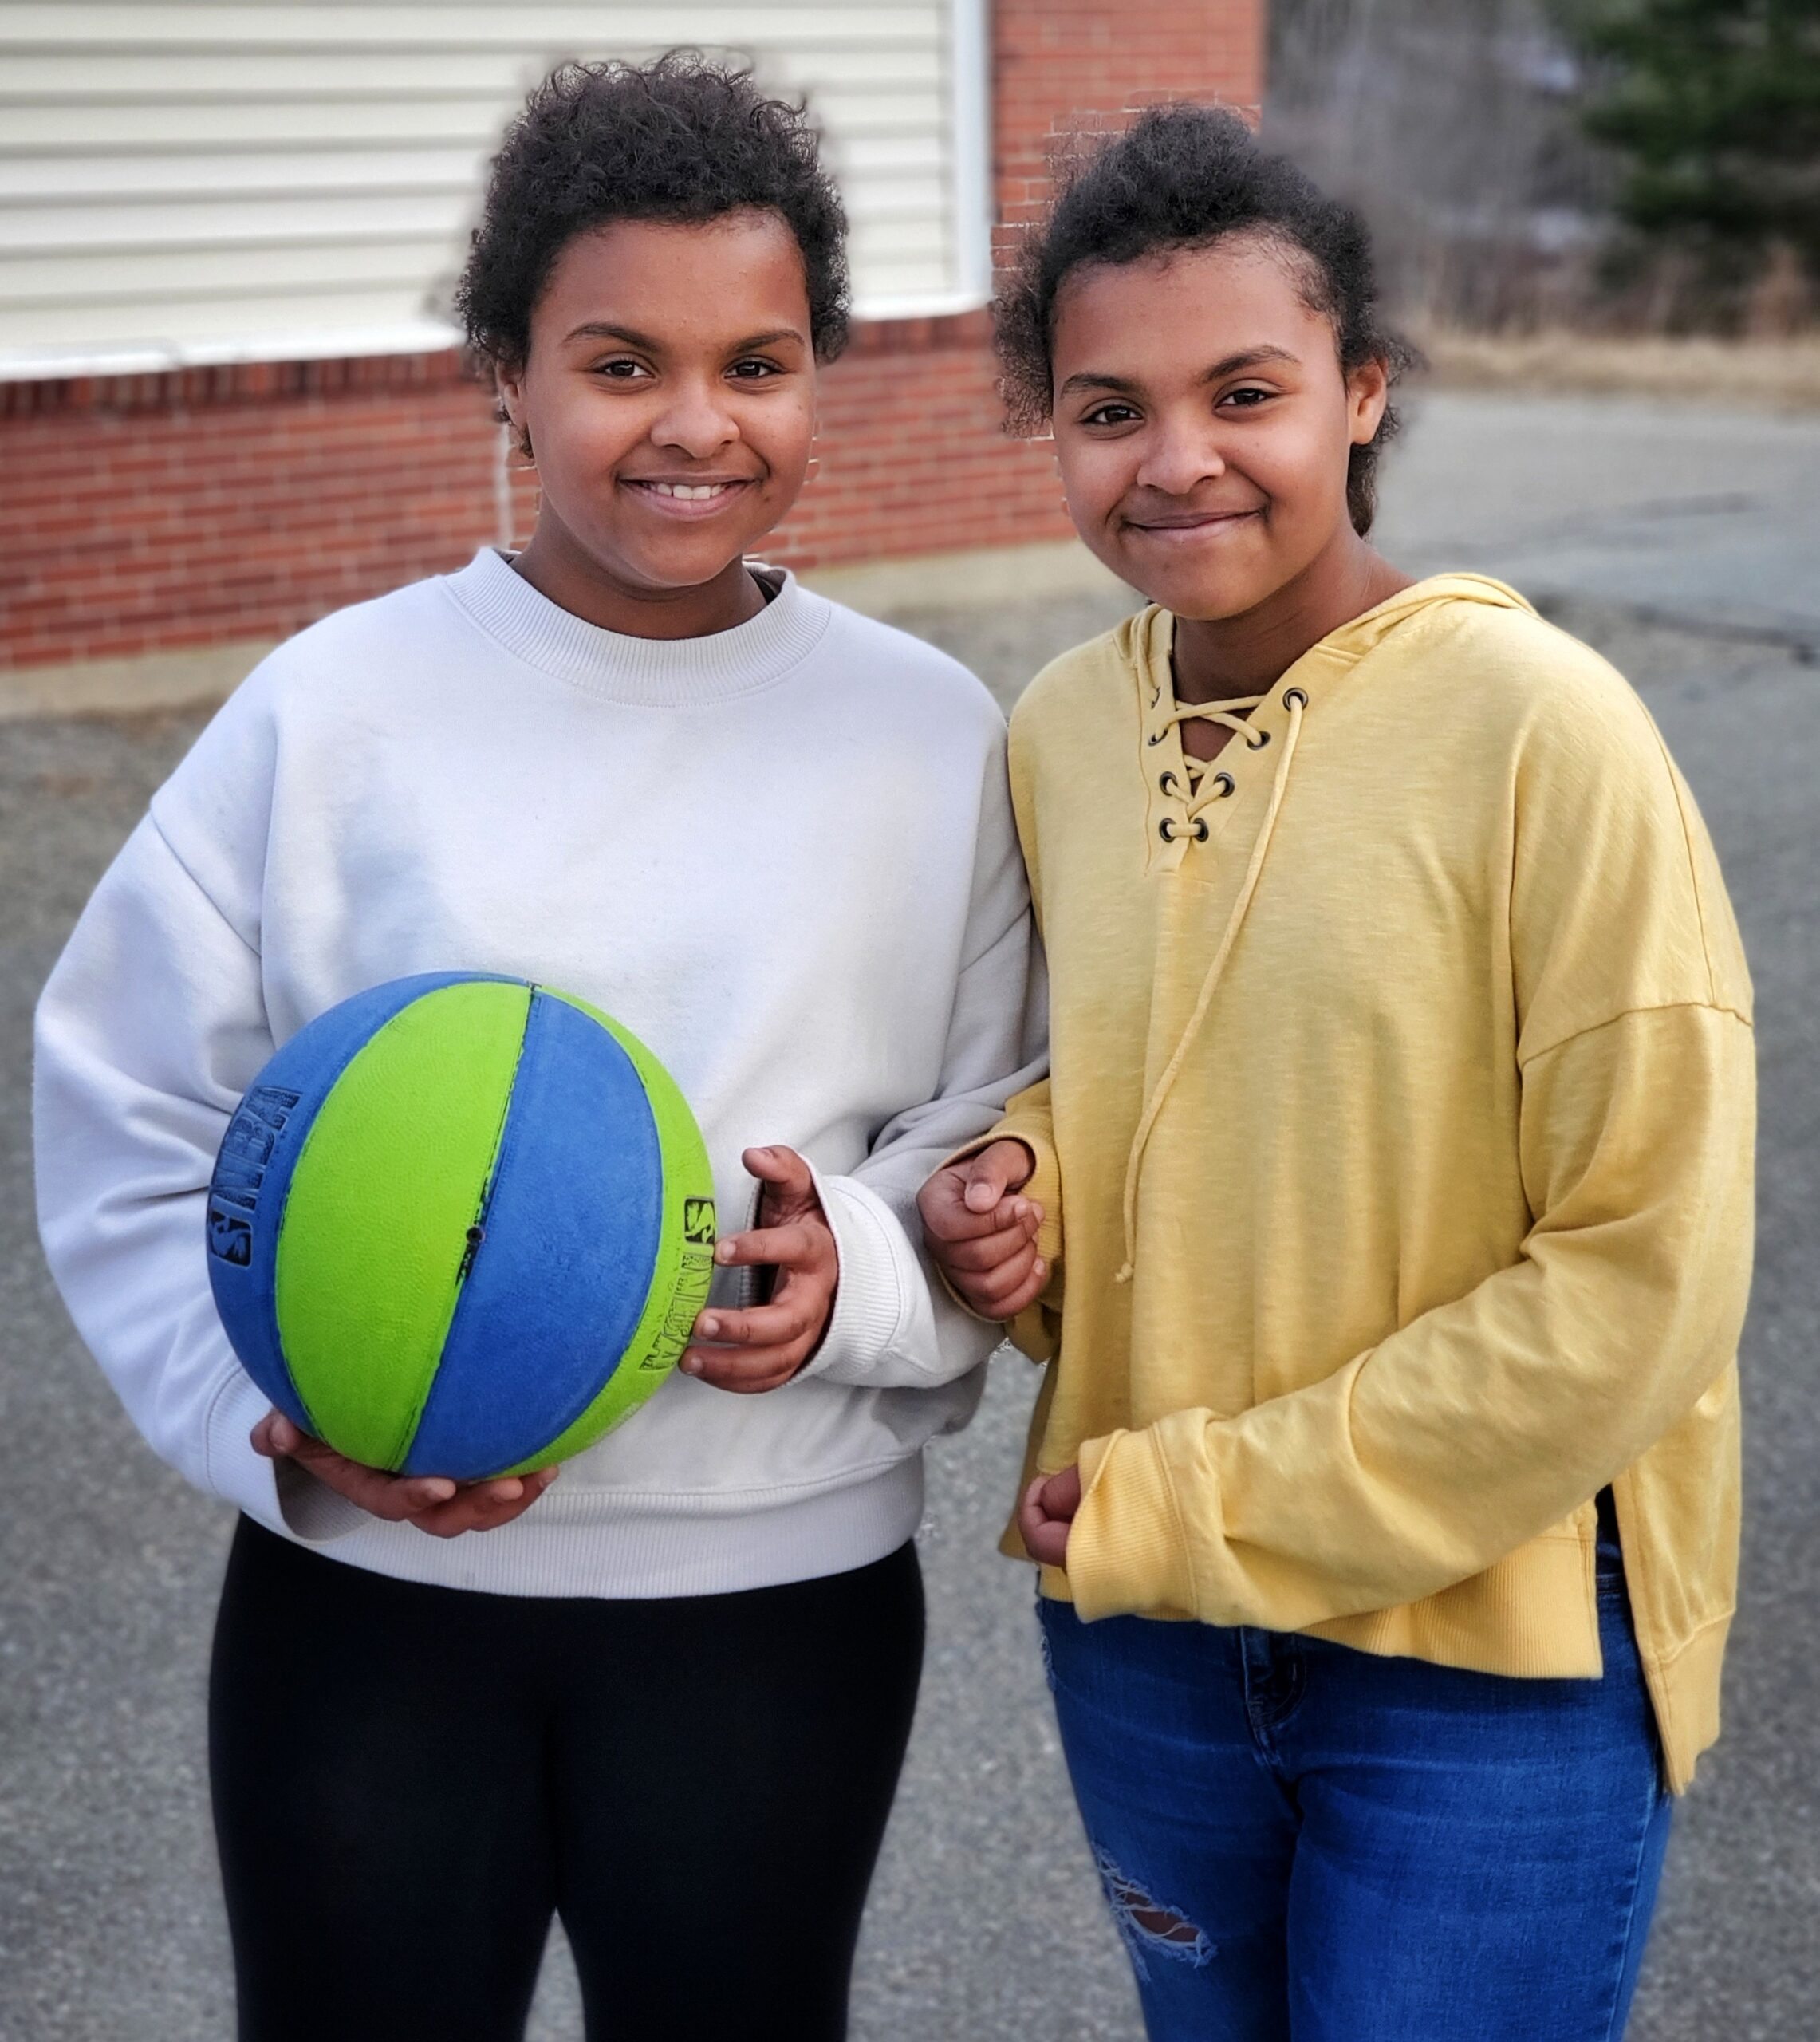 Color photograph of two pre-teen girls on a school playground. They have brown skin and are smiling. One holds a basketball.